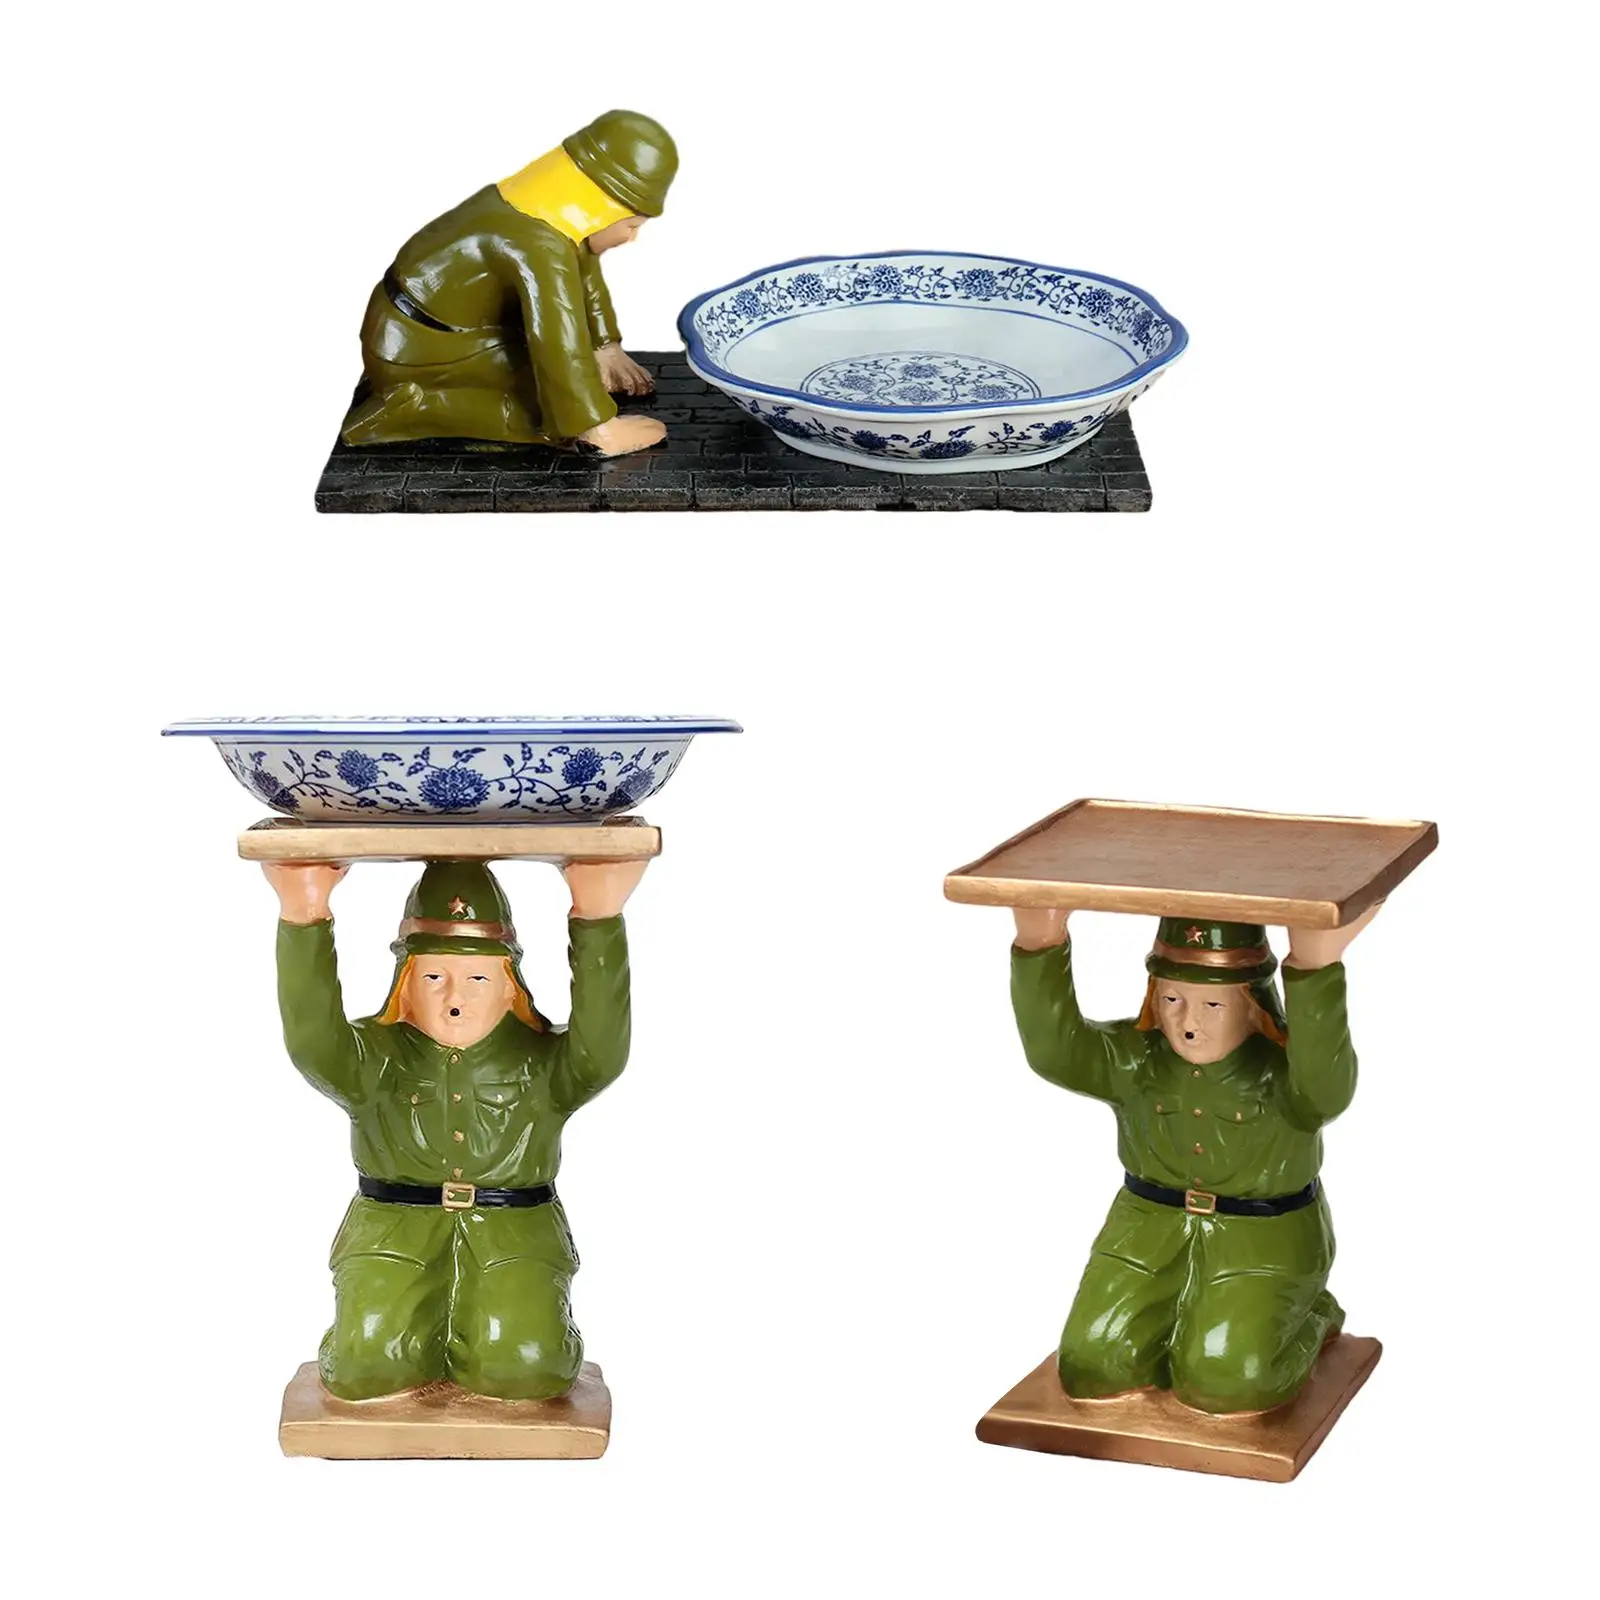 Serving Tray with Figurine Dinner Plate Restaurant Serving Tableware Fruit Trays for Restaurant Dining Room Hotel Decor